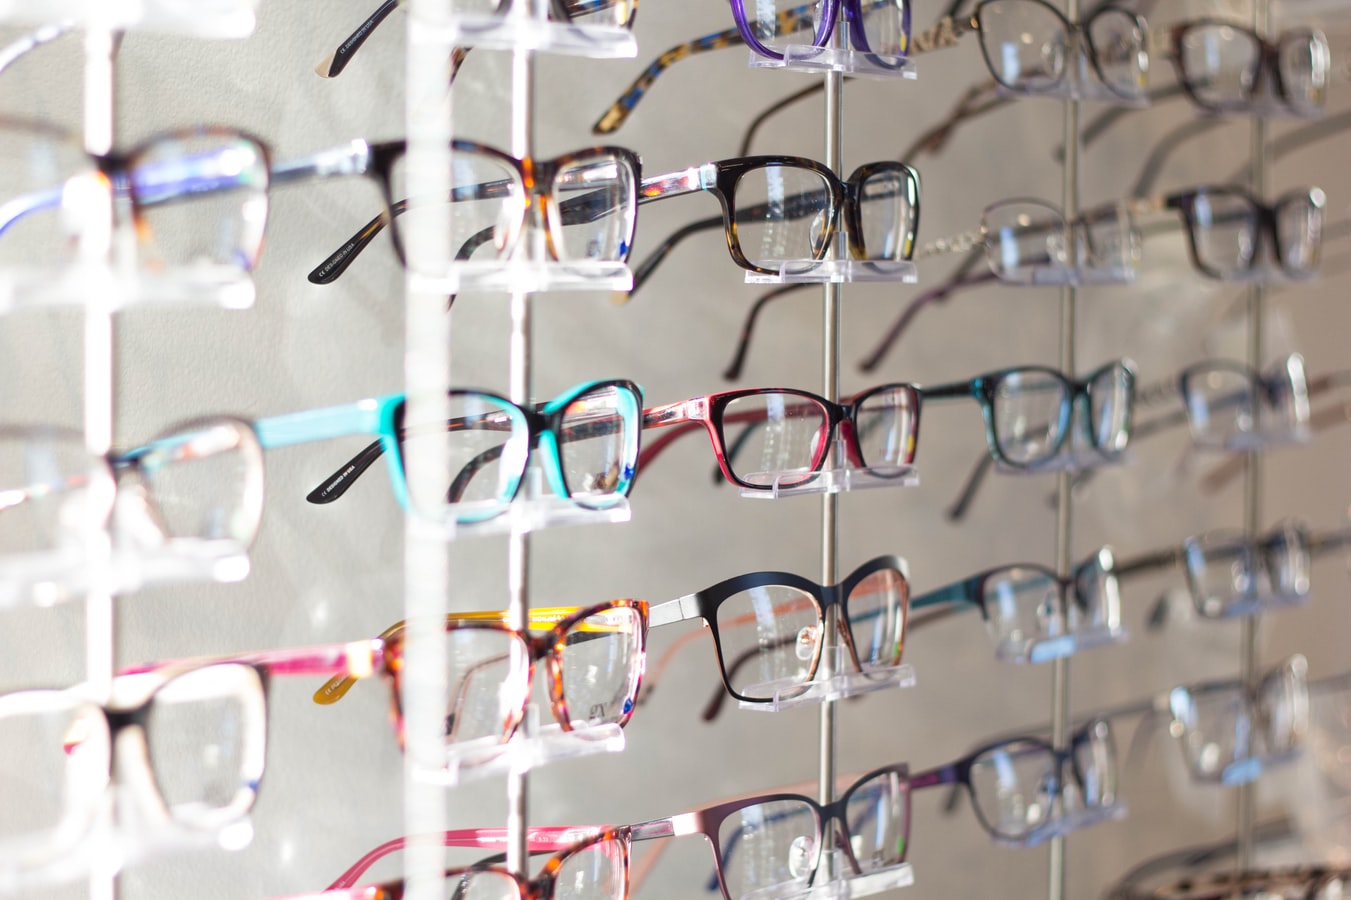 Why are there so many myopic patients in China?